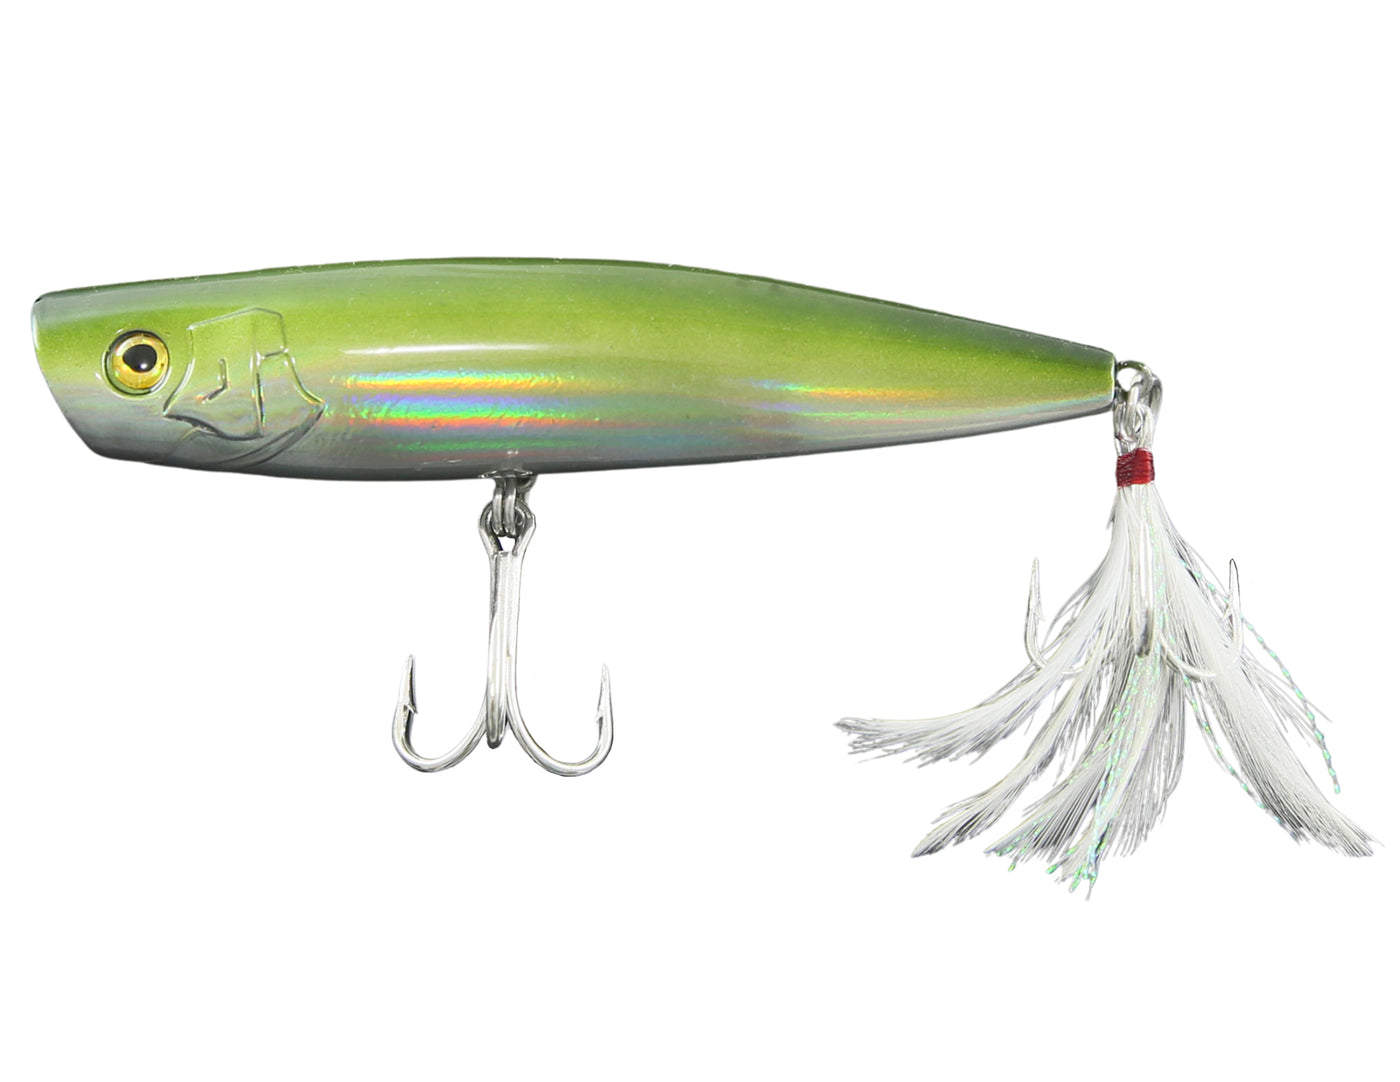 Saltwater Popper Lure - Topwater Popper Lure 4.7 inch/1.5oz Holistic Green  海外 即決 - スキル、知識